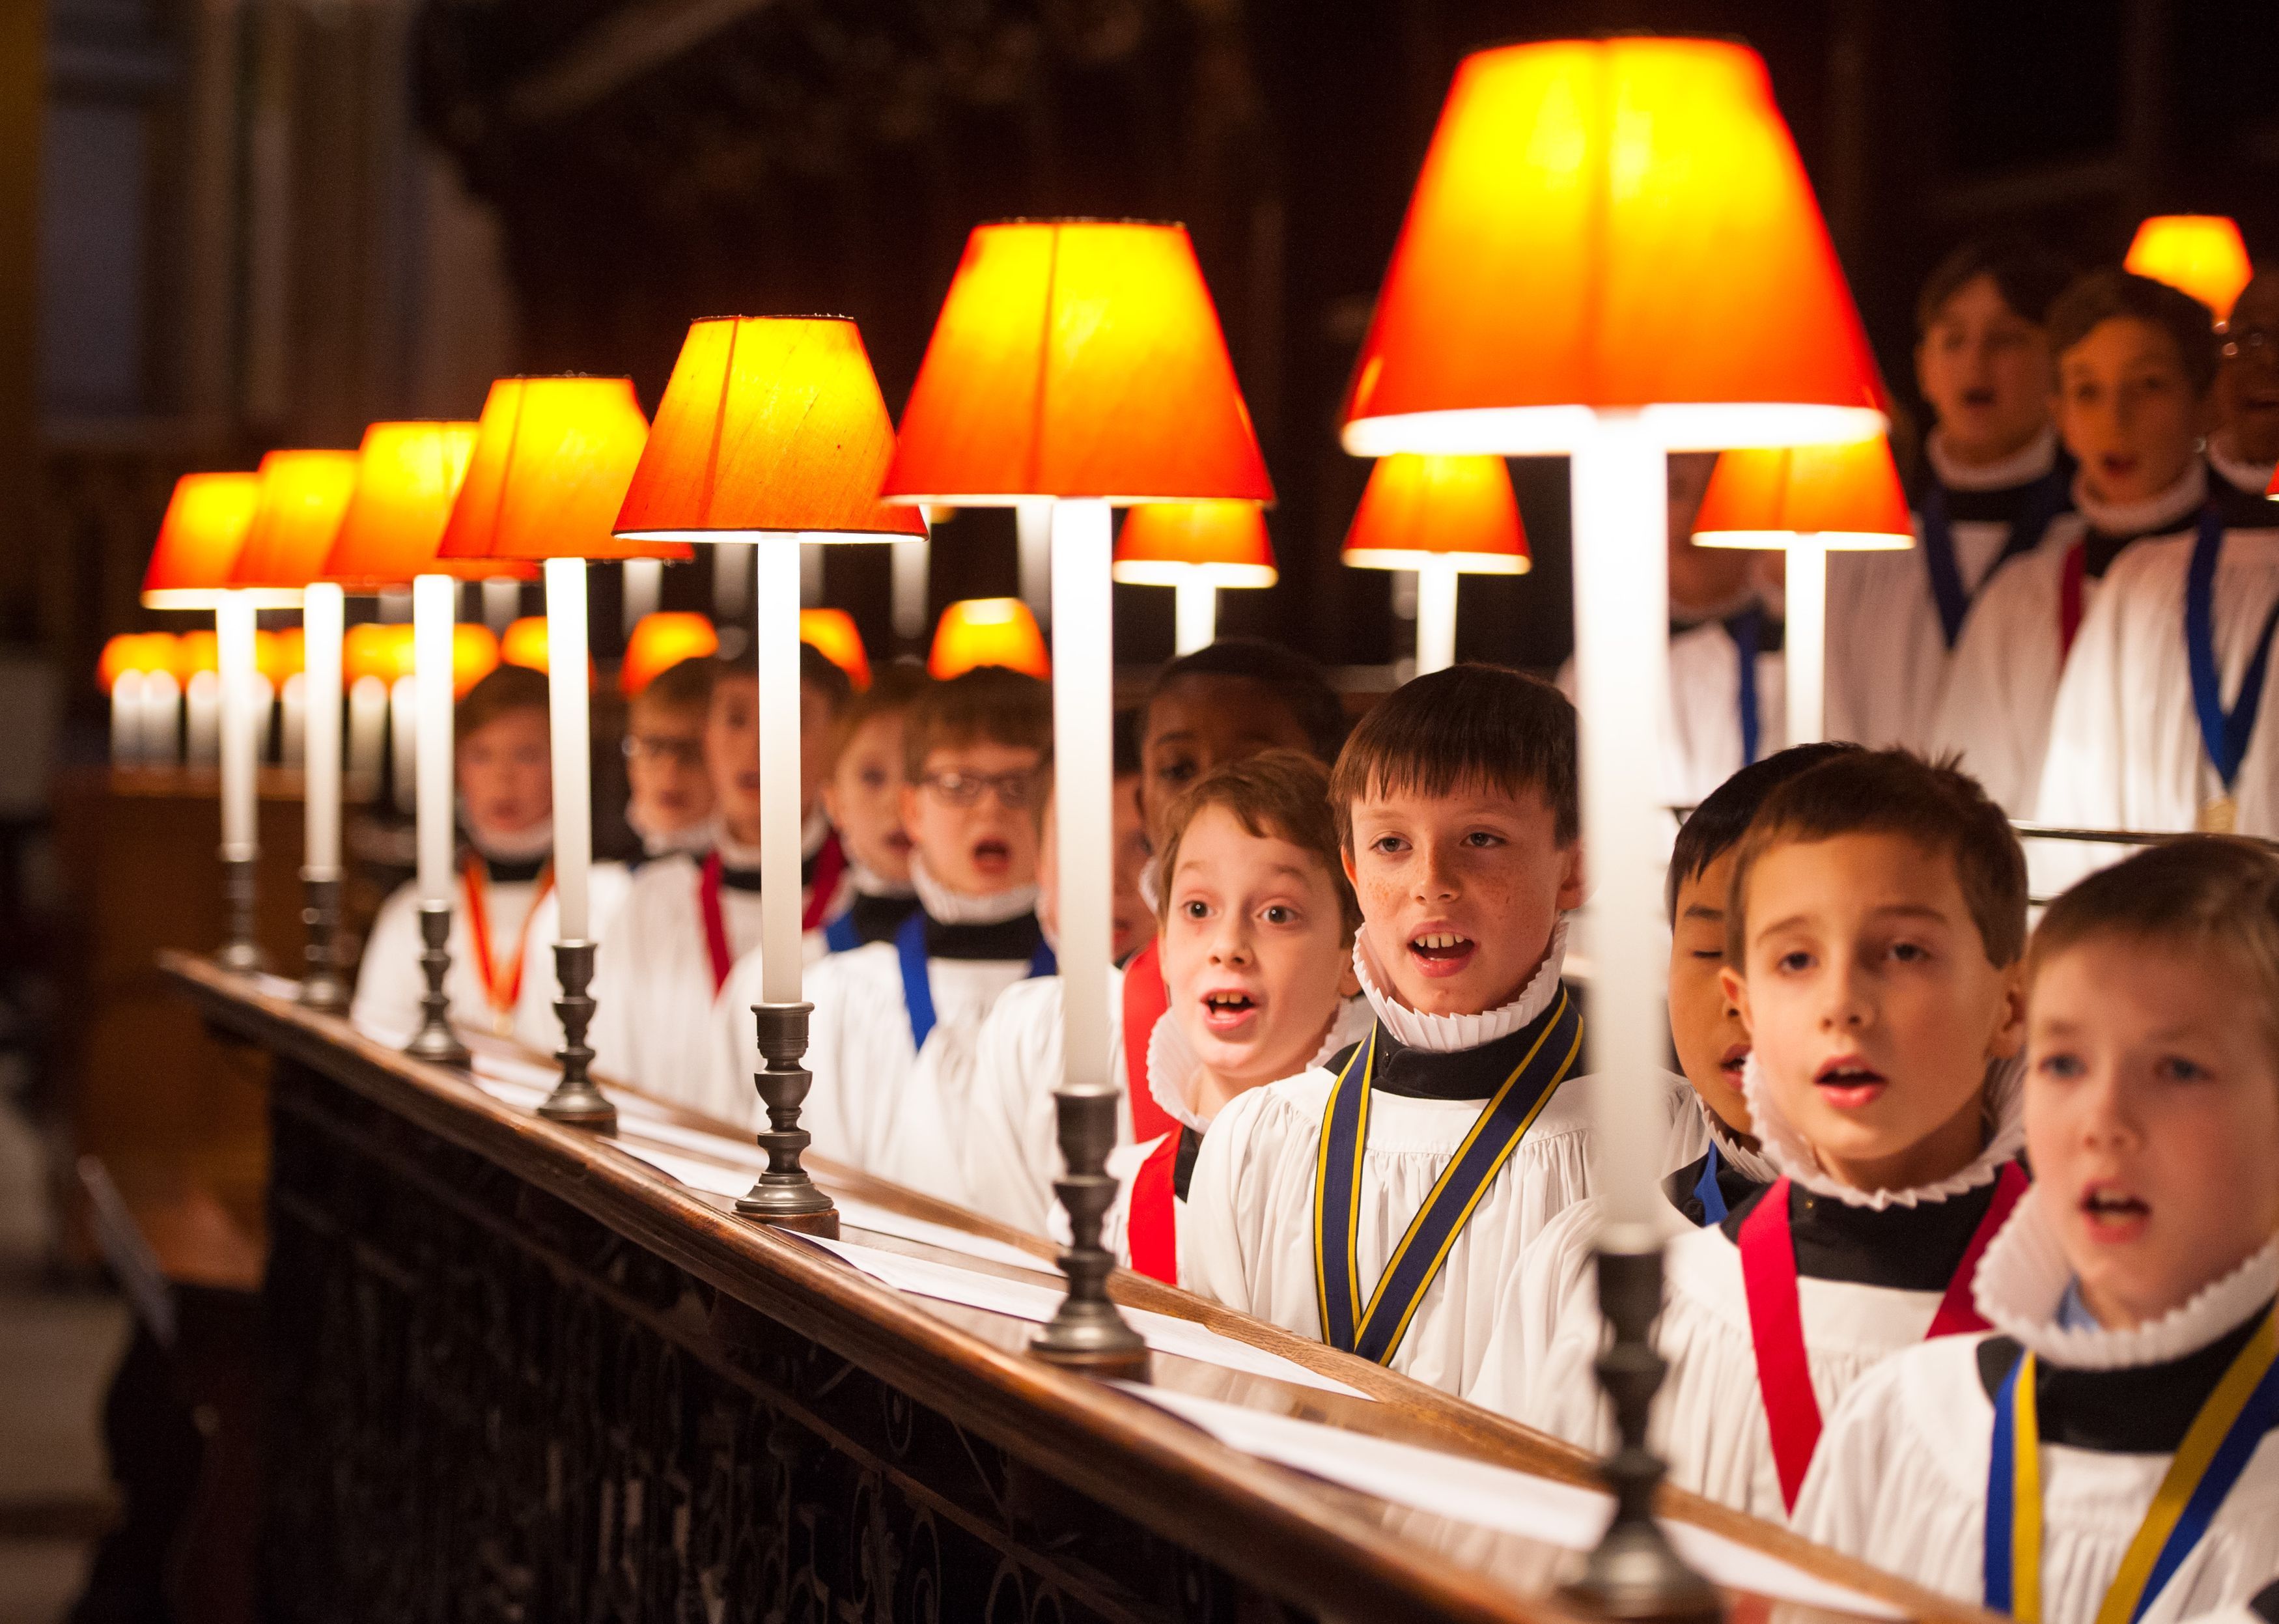 Choirboys - Chichester cathedral